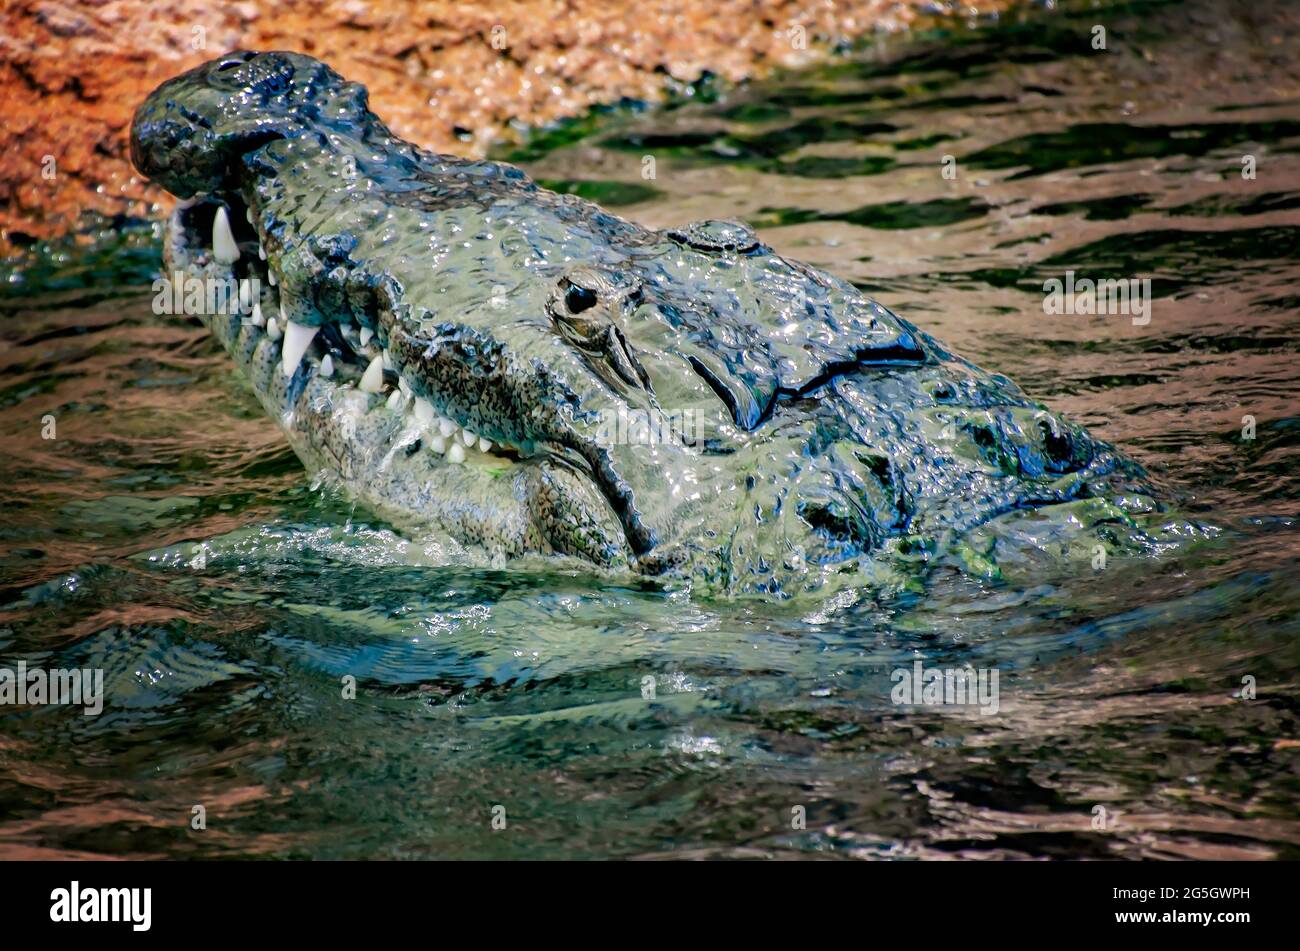 An American crocodile swims in the water at Mississippi Aquarium, June 24, 2021, in Gulfport, Mississippi. Stock Photo